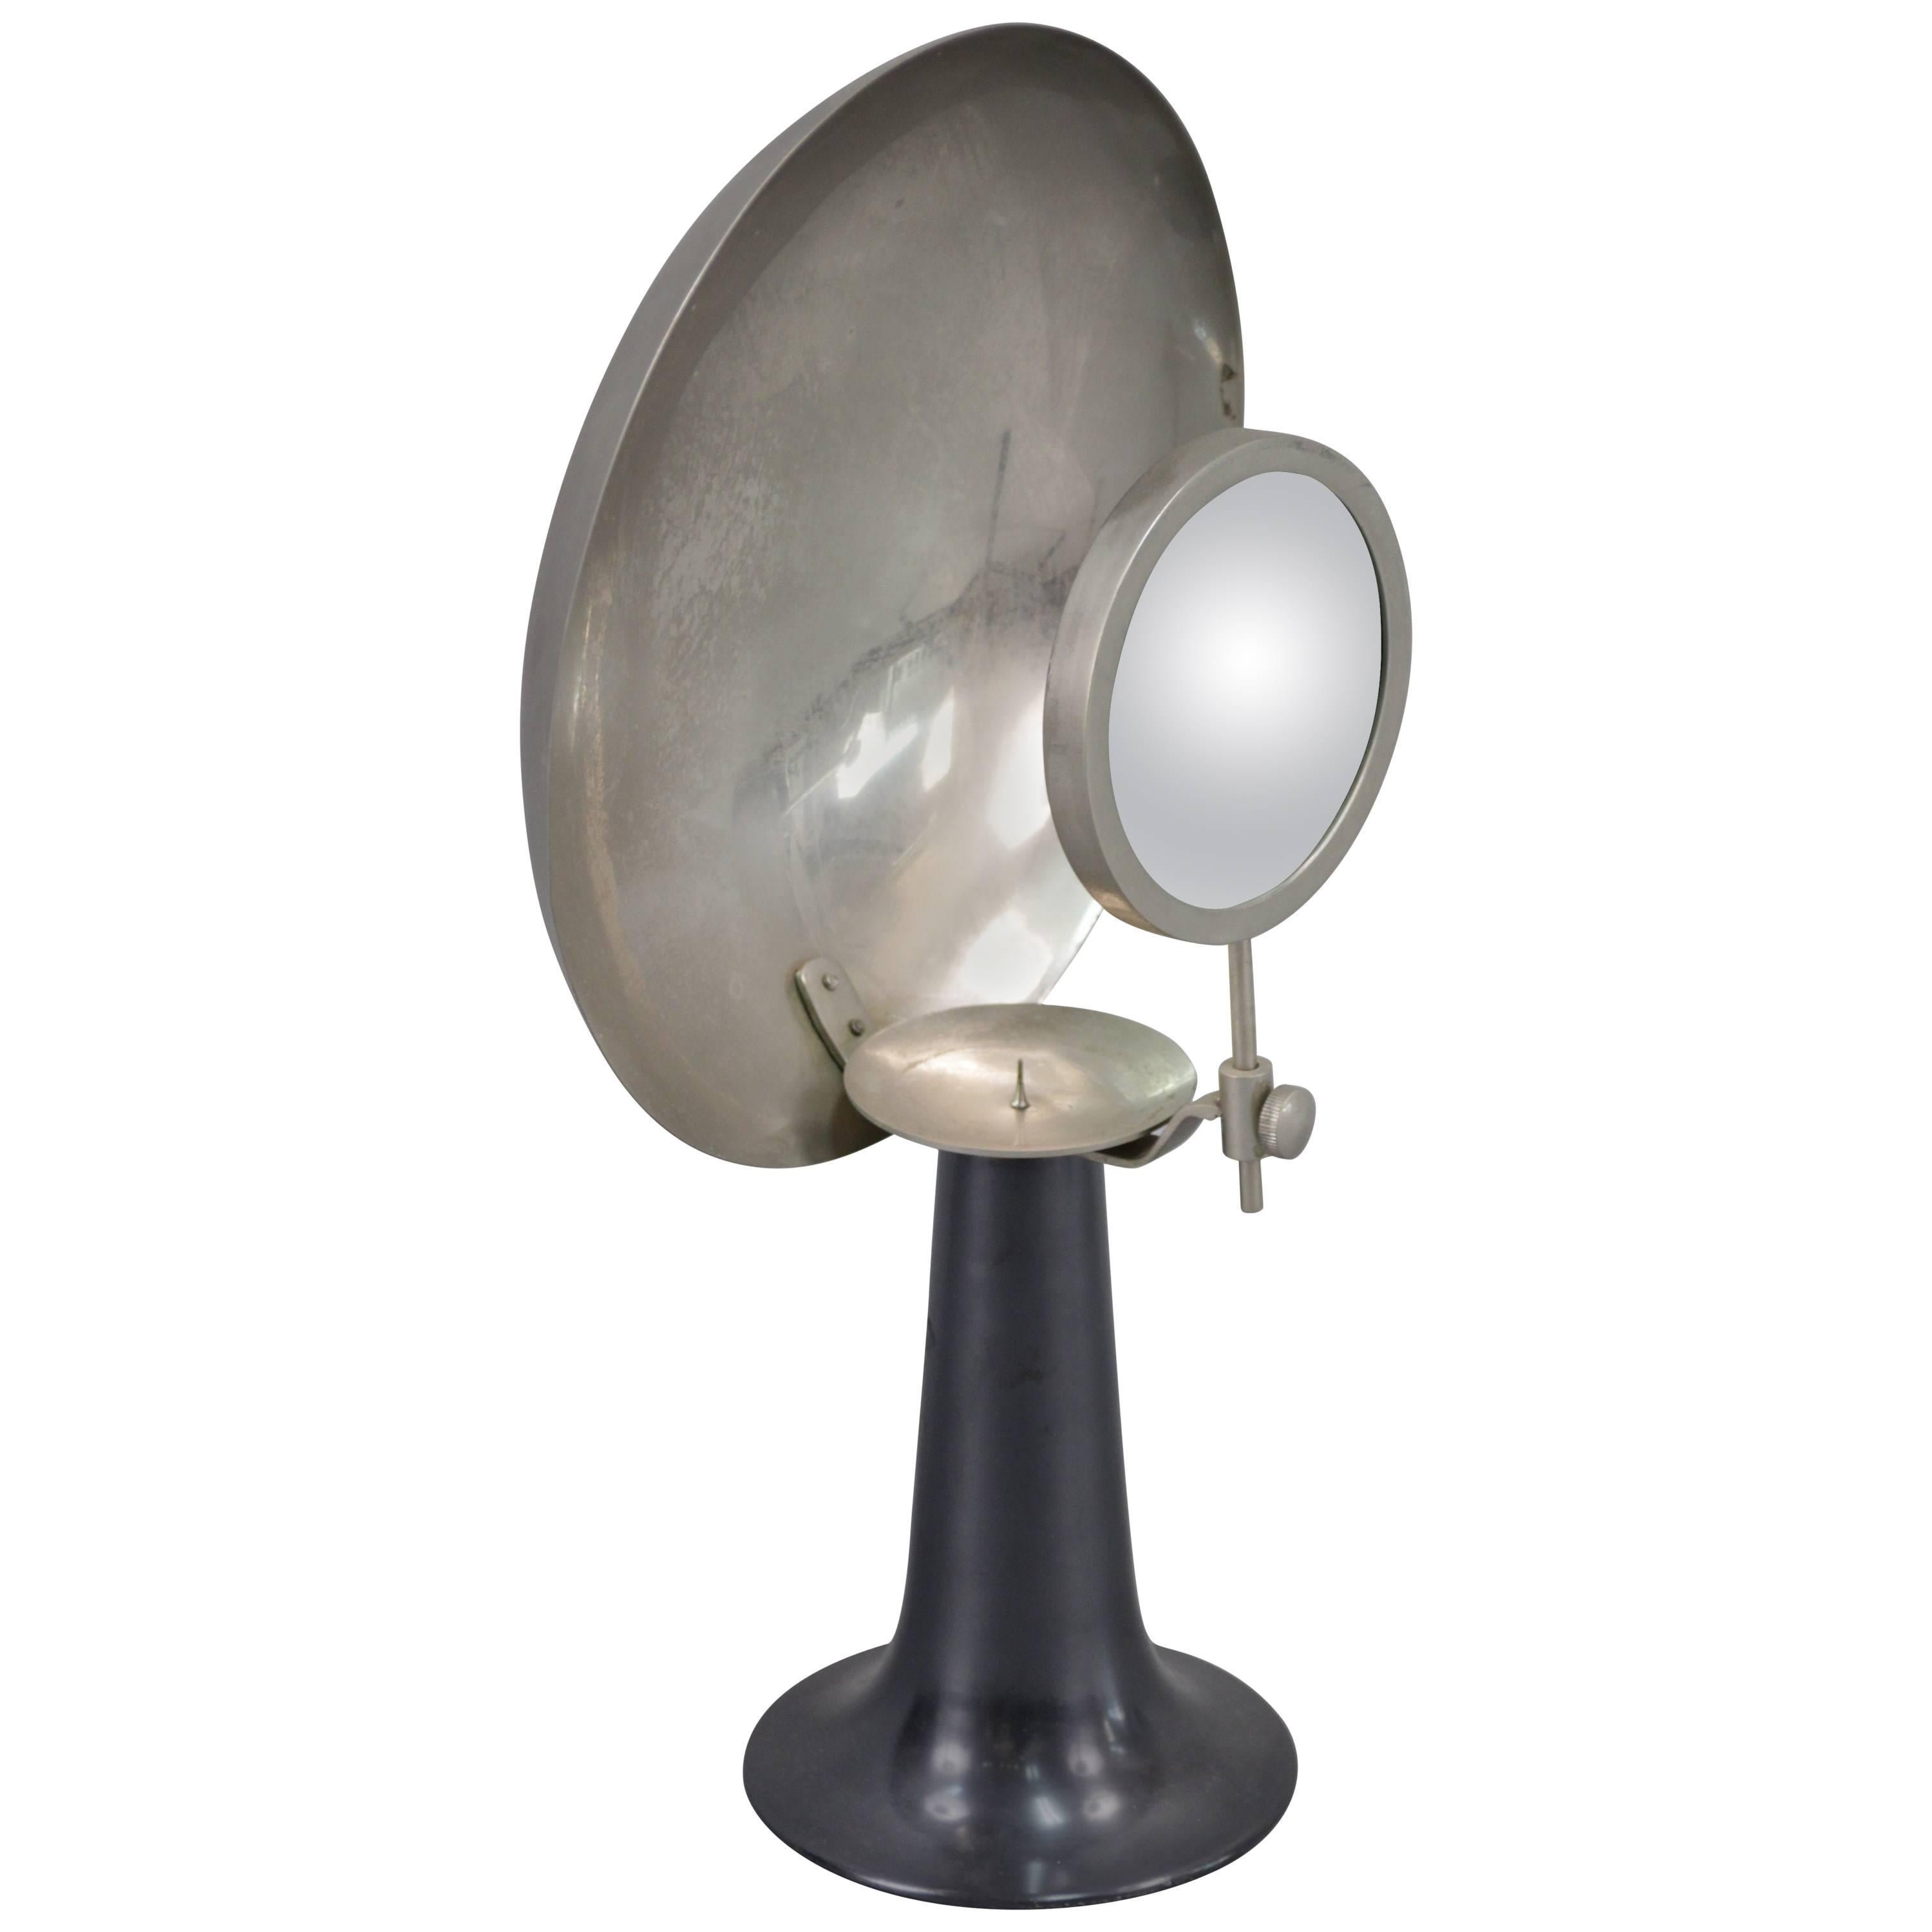 Medical / Scientific Parabolic Magnifying Candle Lamp